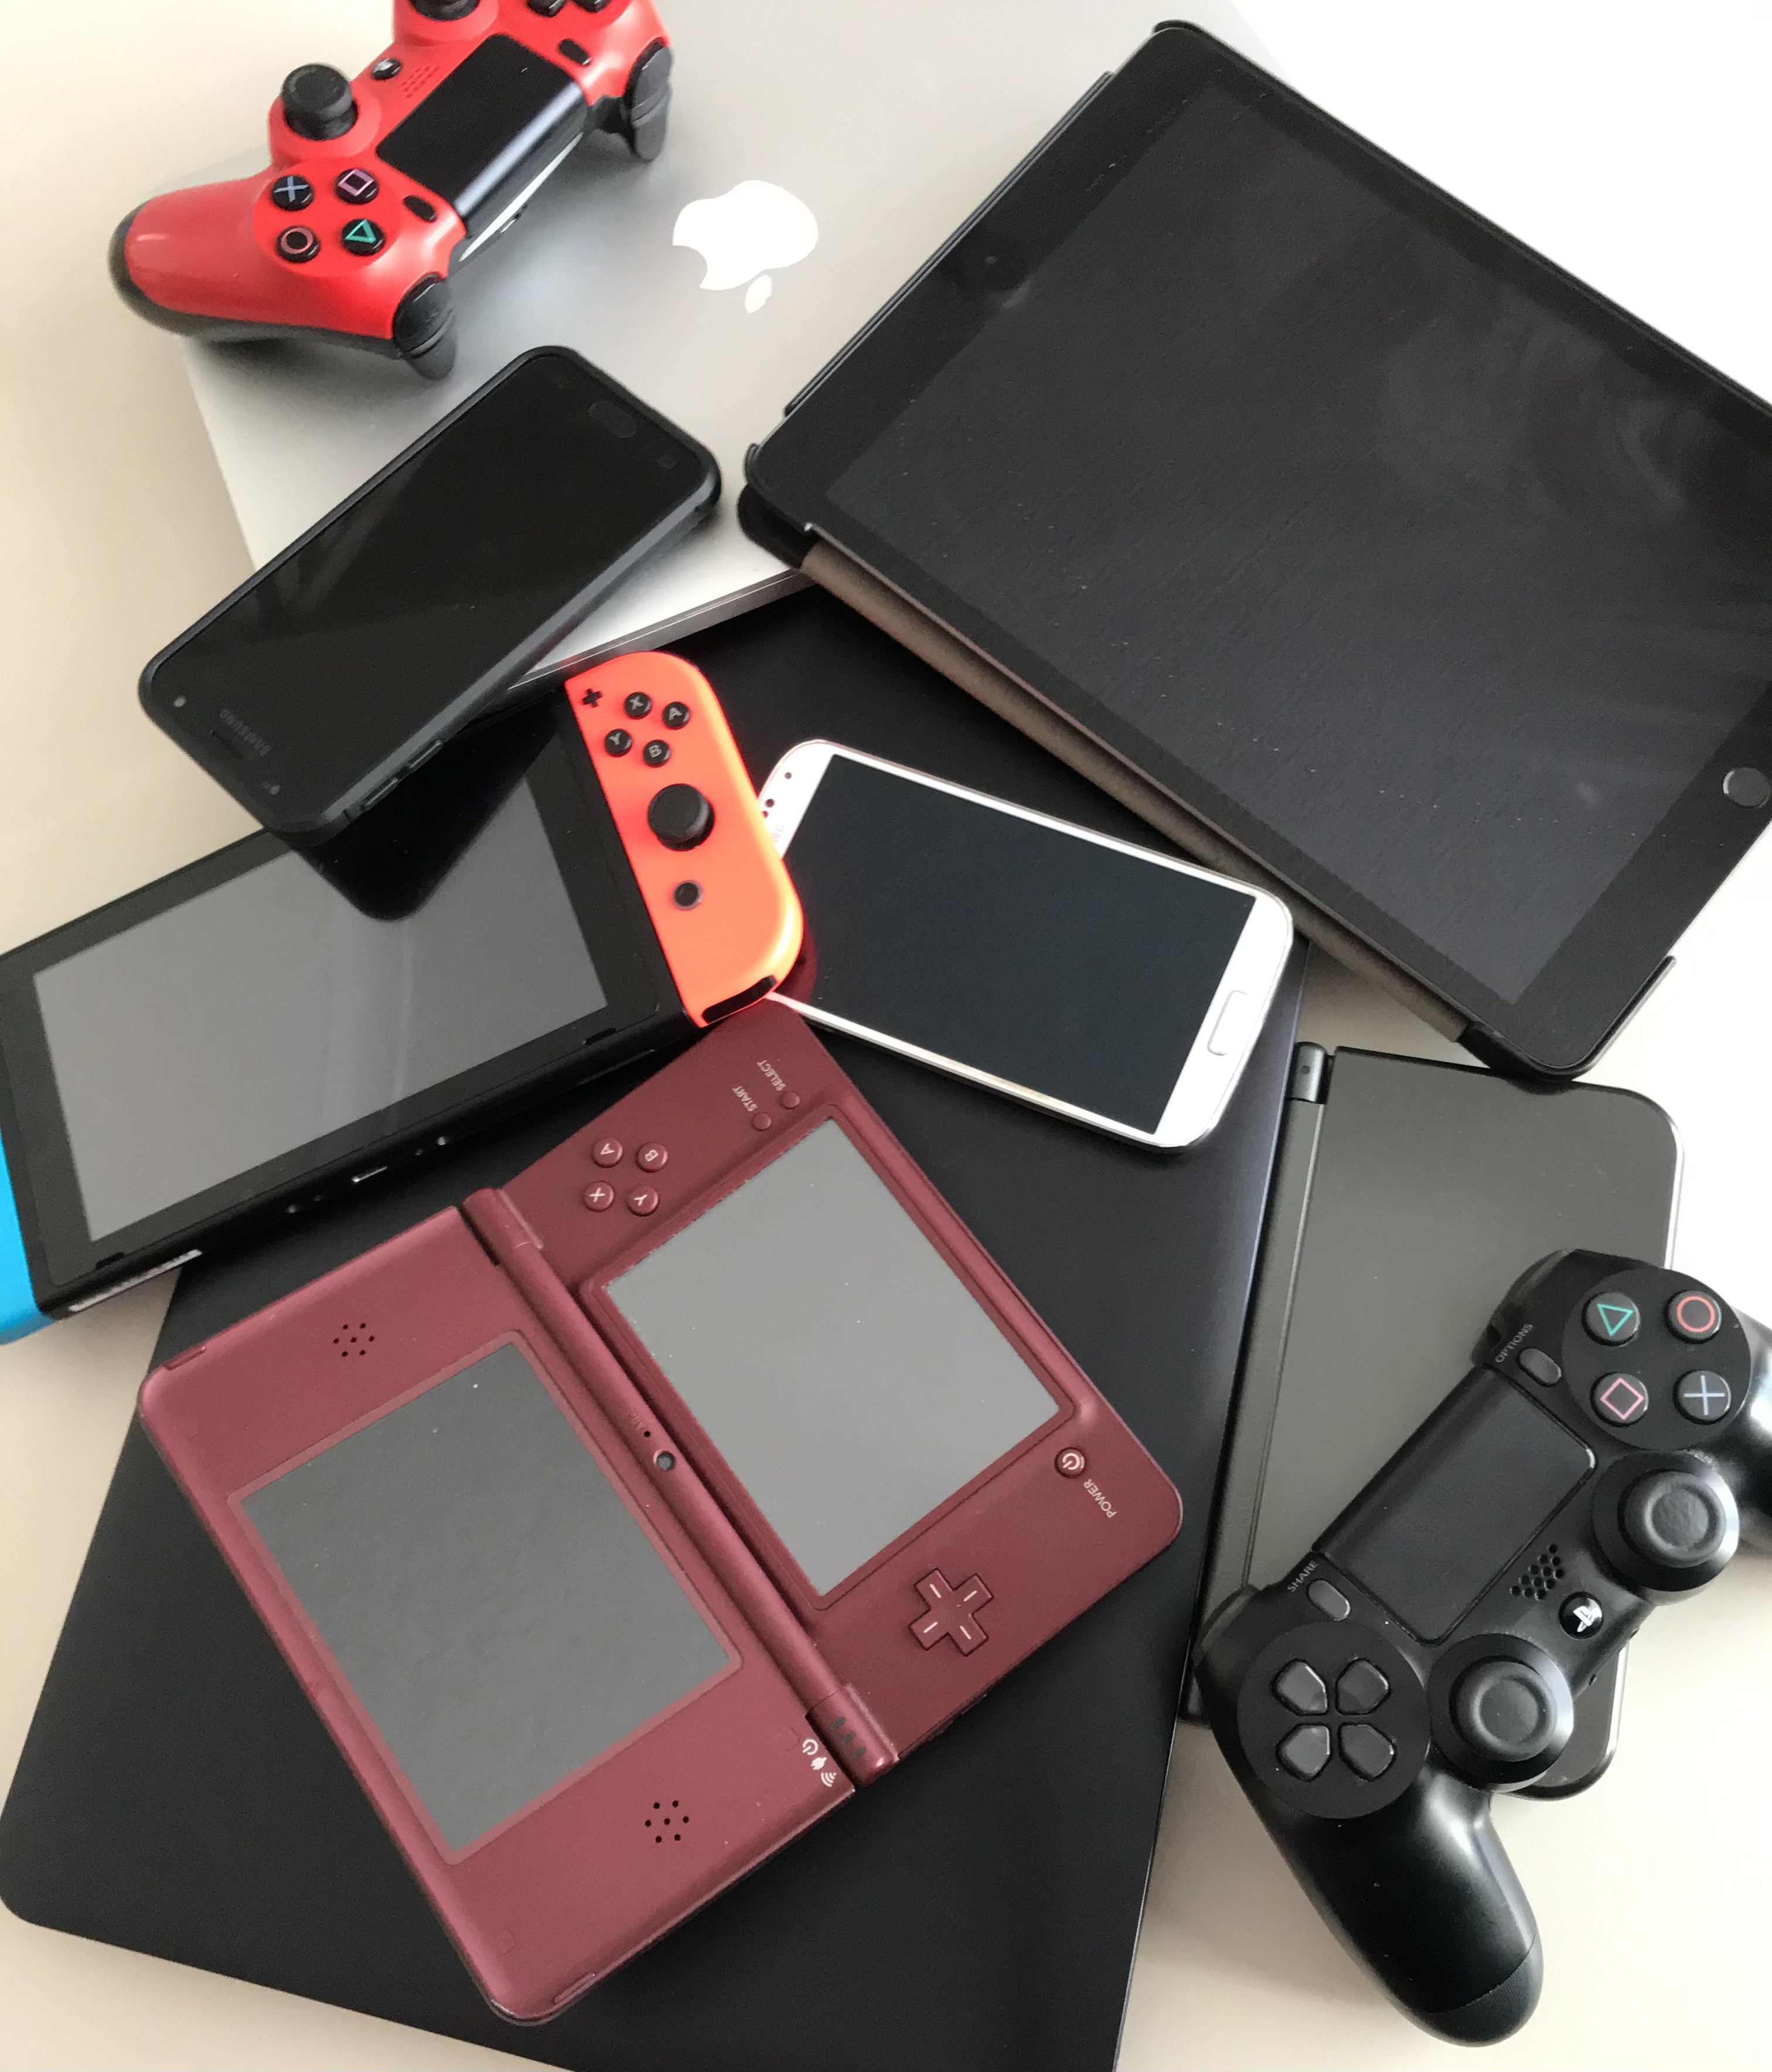 Photo of different digital devices: ipad, laptop, mobile phone and game consoles